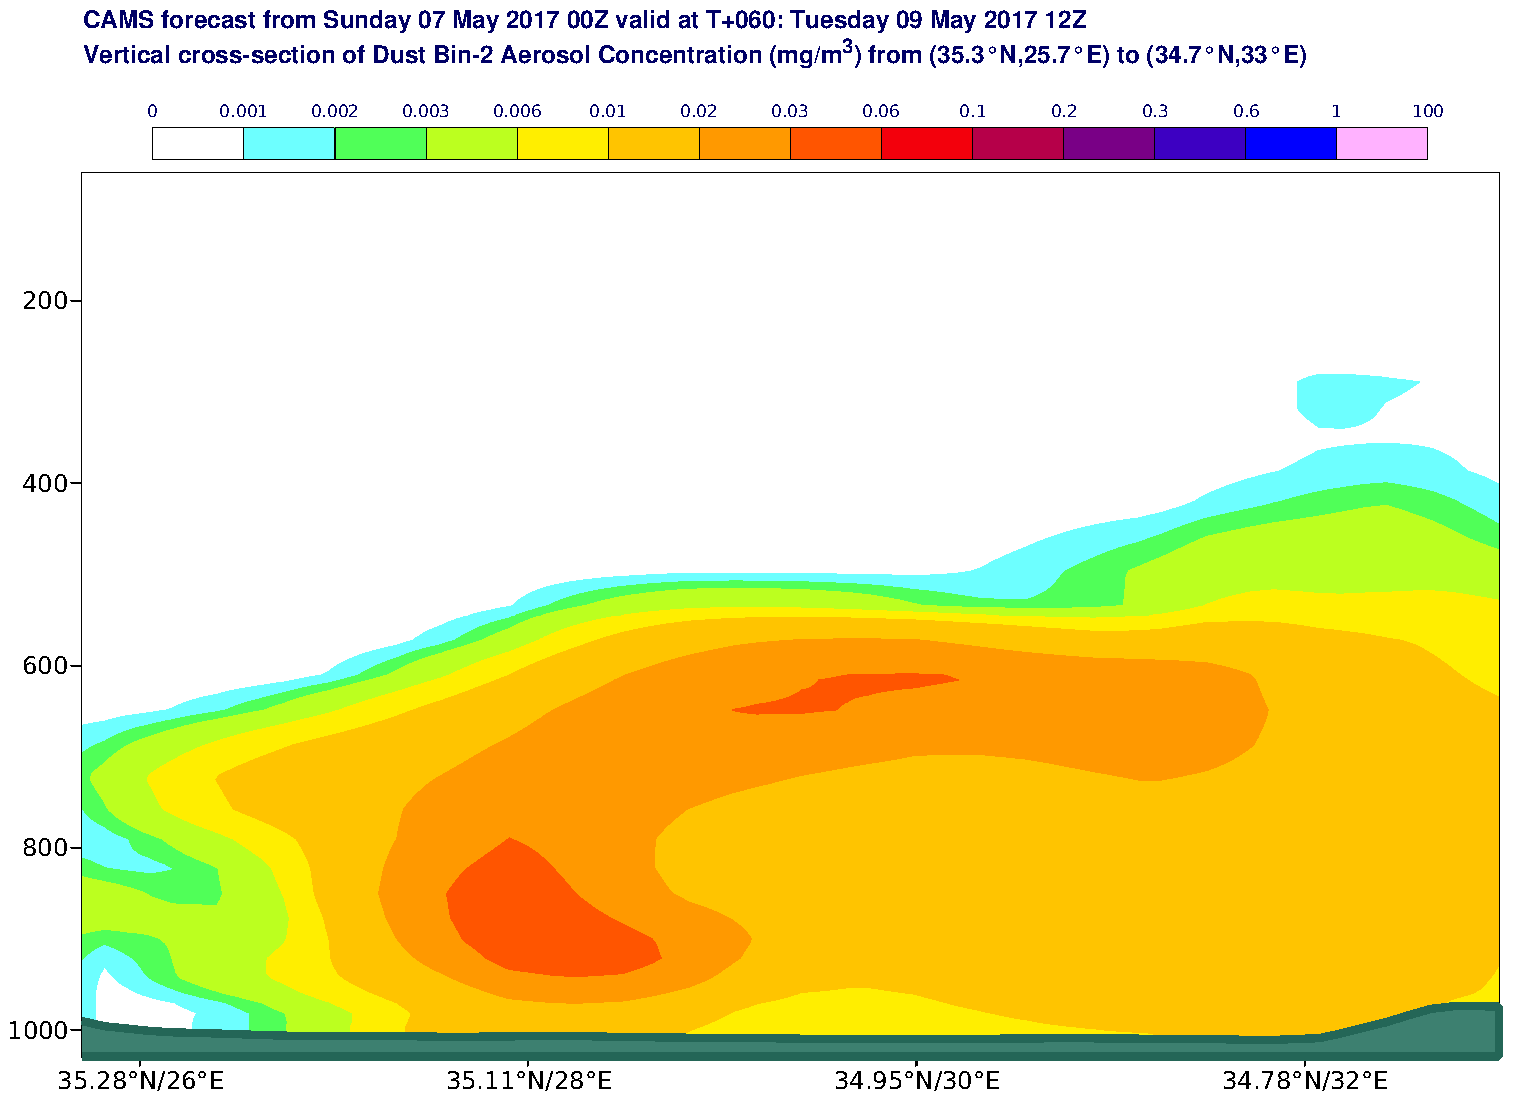 Vertical cross-section of Dust Bin-2 Aerosol Concentration (mg/m3) valid at T60 - 2017-05-09 12:00